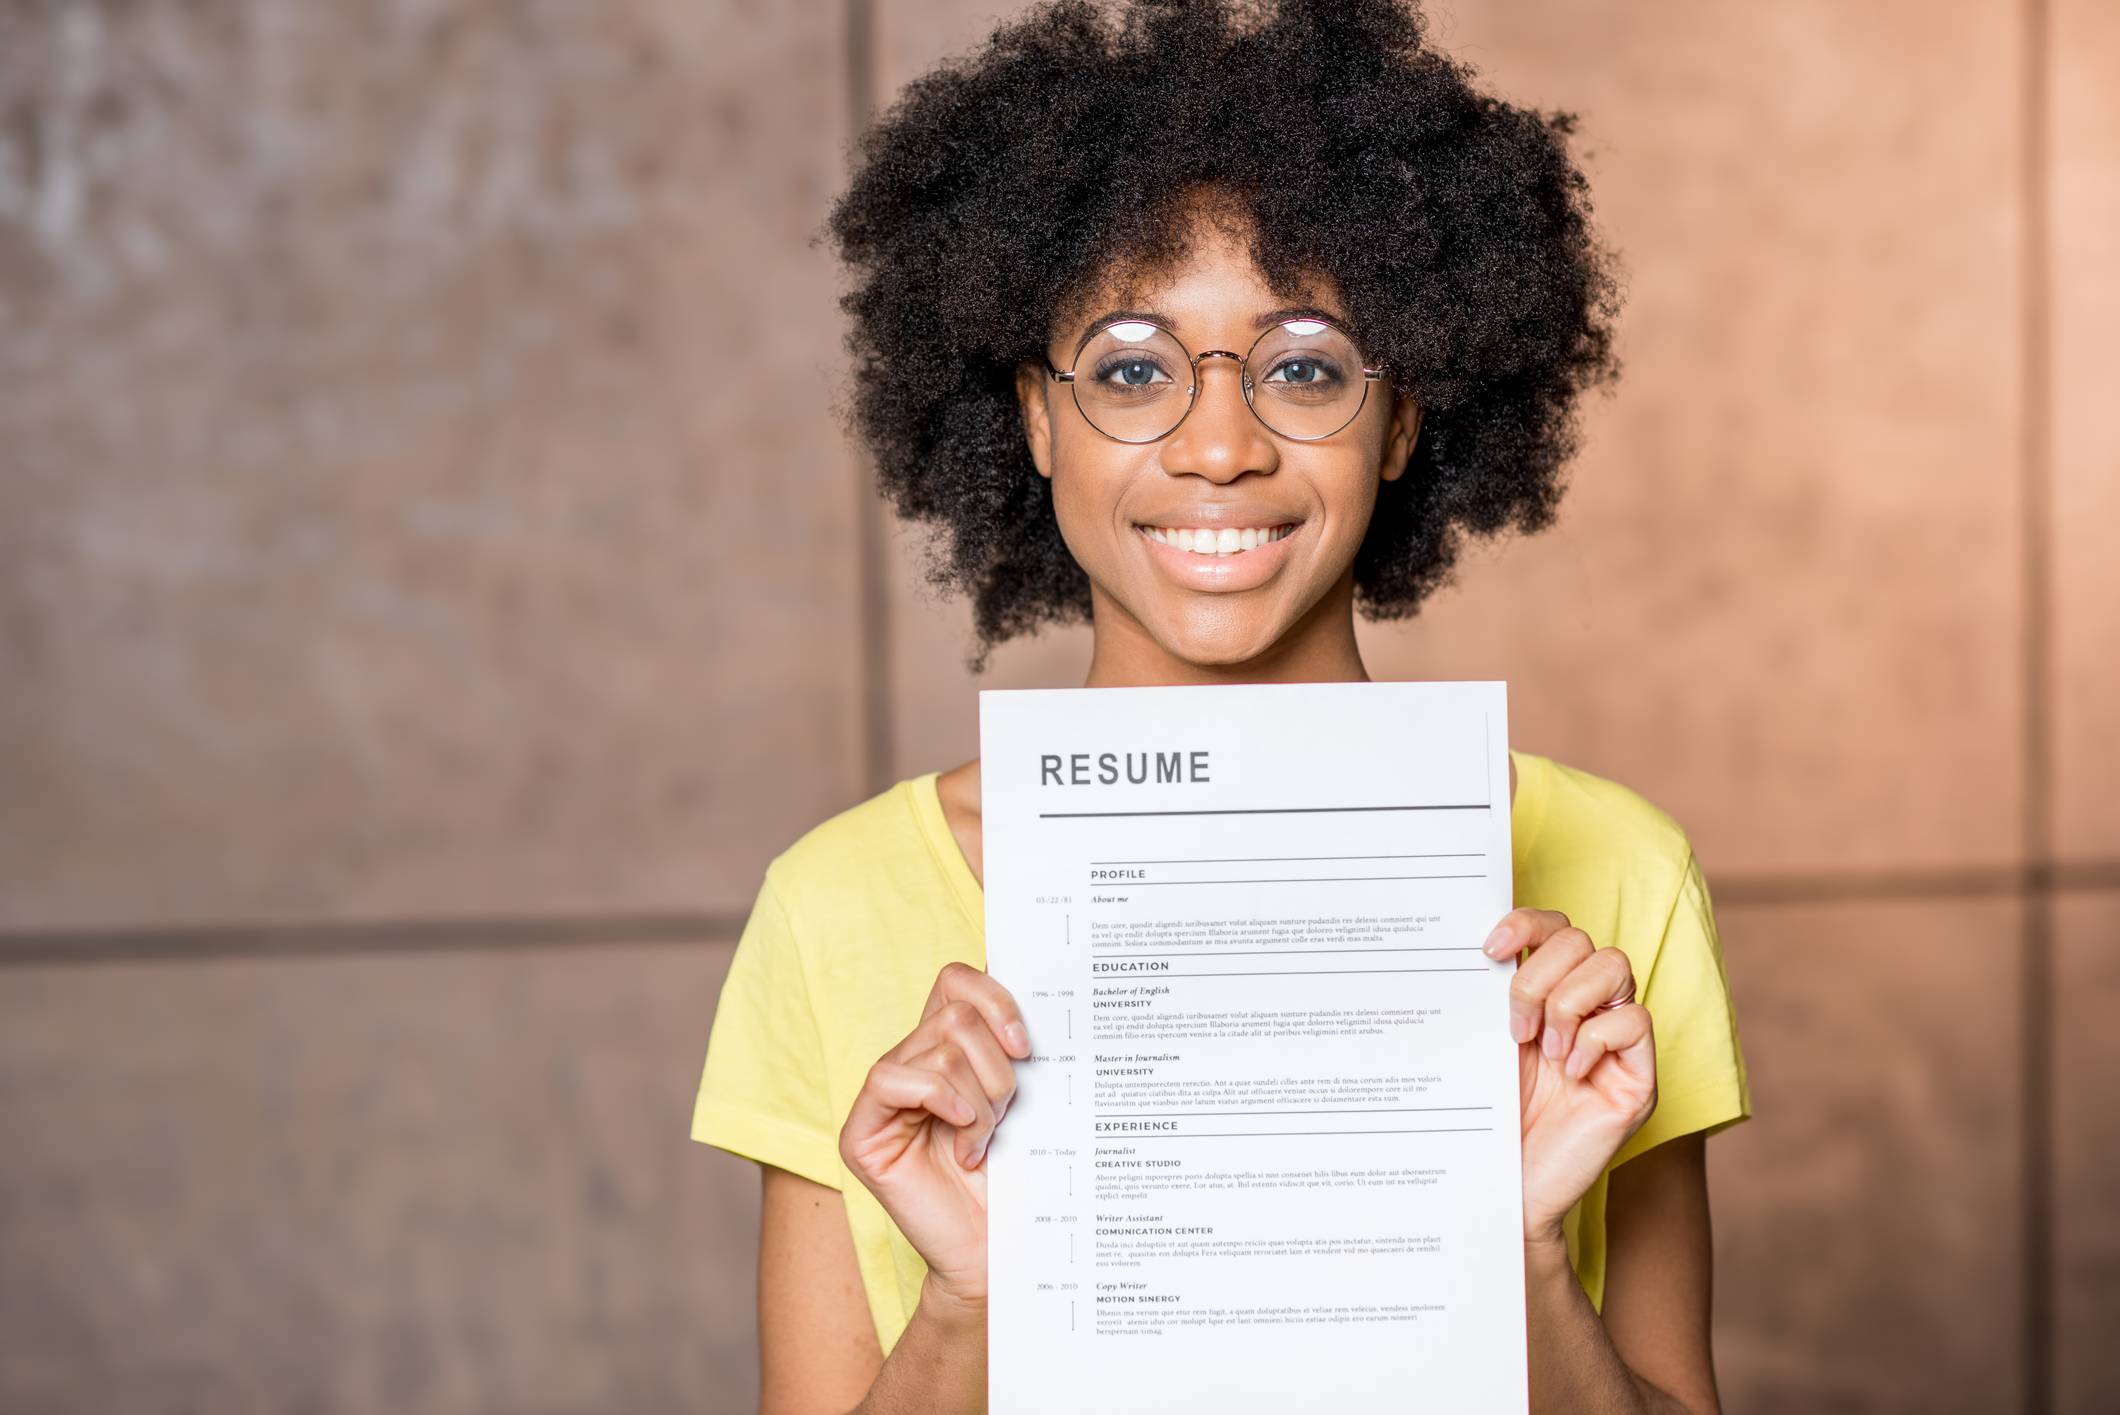 How to keep your resume up to date and to avoid outdated practices